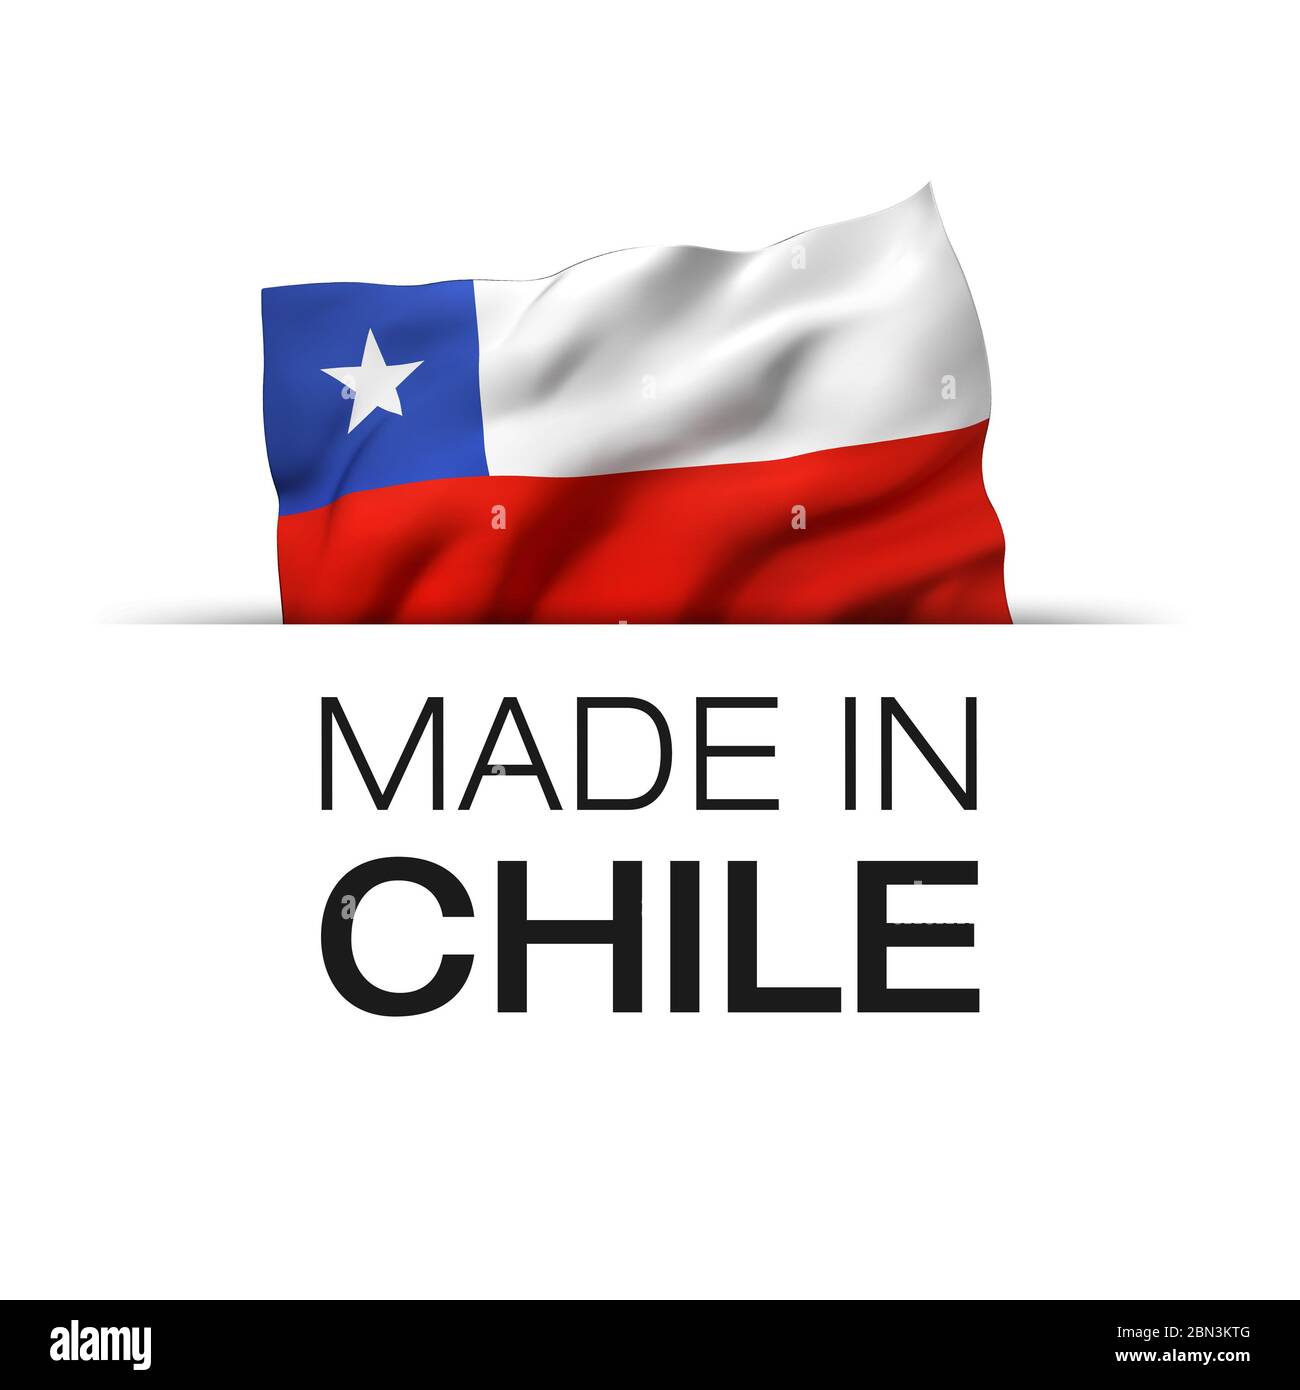 Made in Chile - Guarantee label with a waving Chilean flag. 3D illustration. Stock Photo